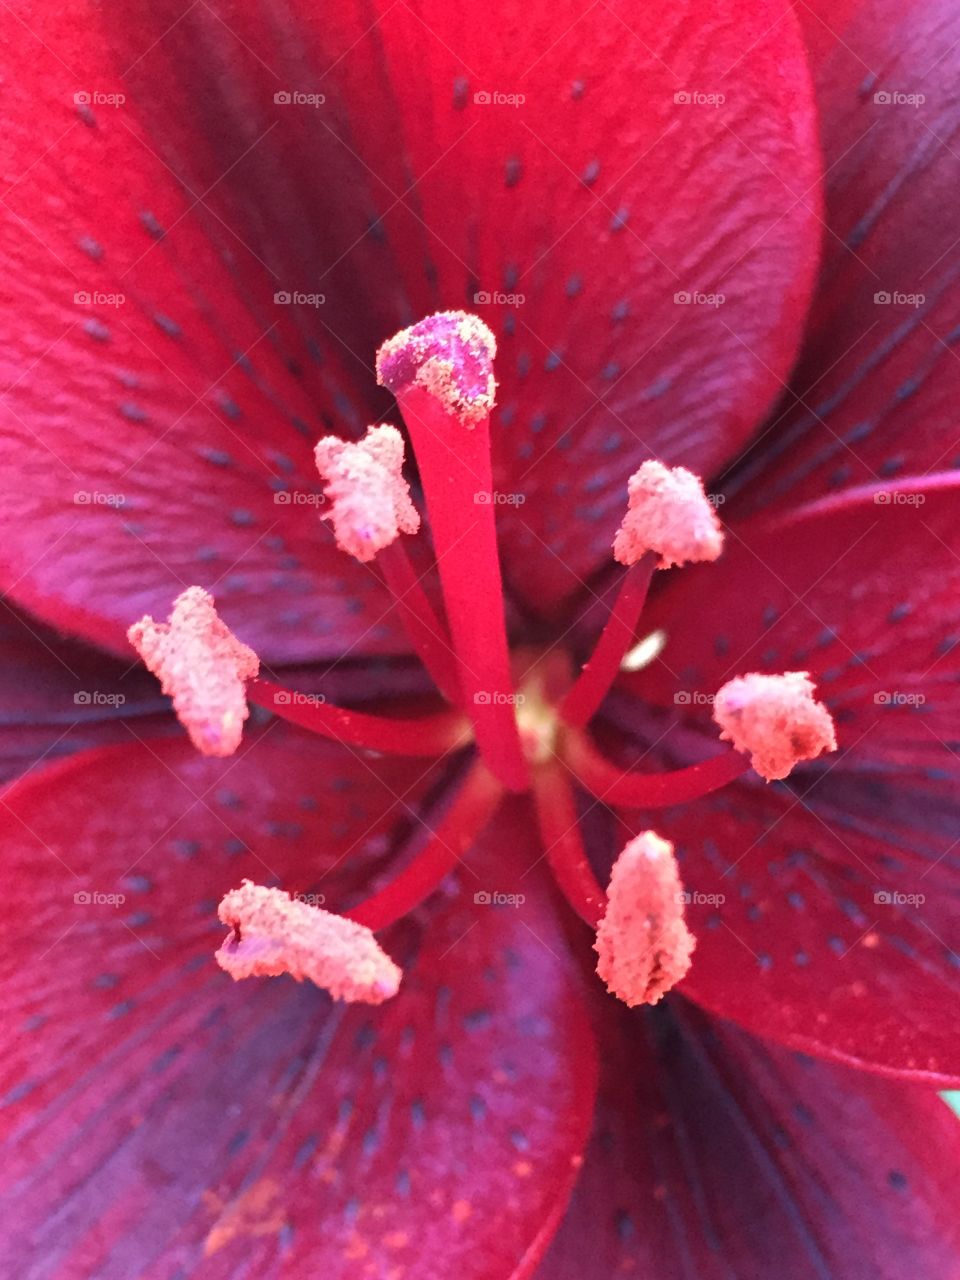 Lily close up
